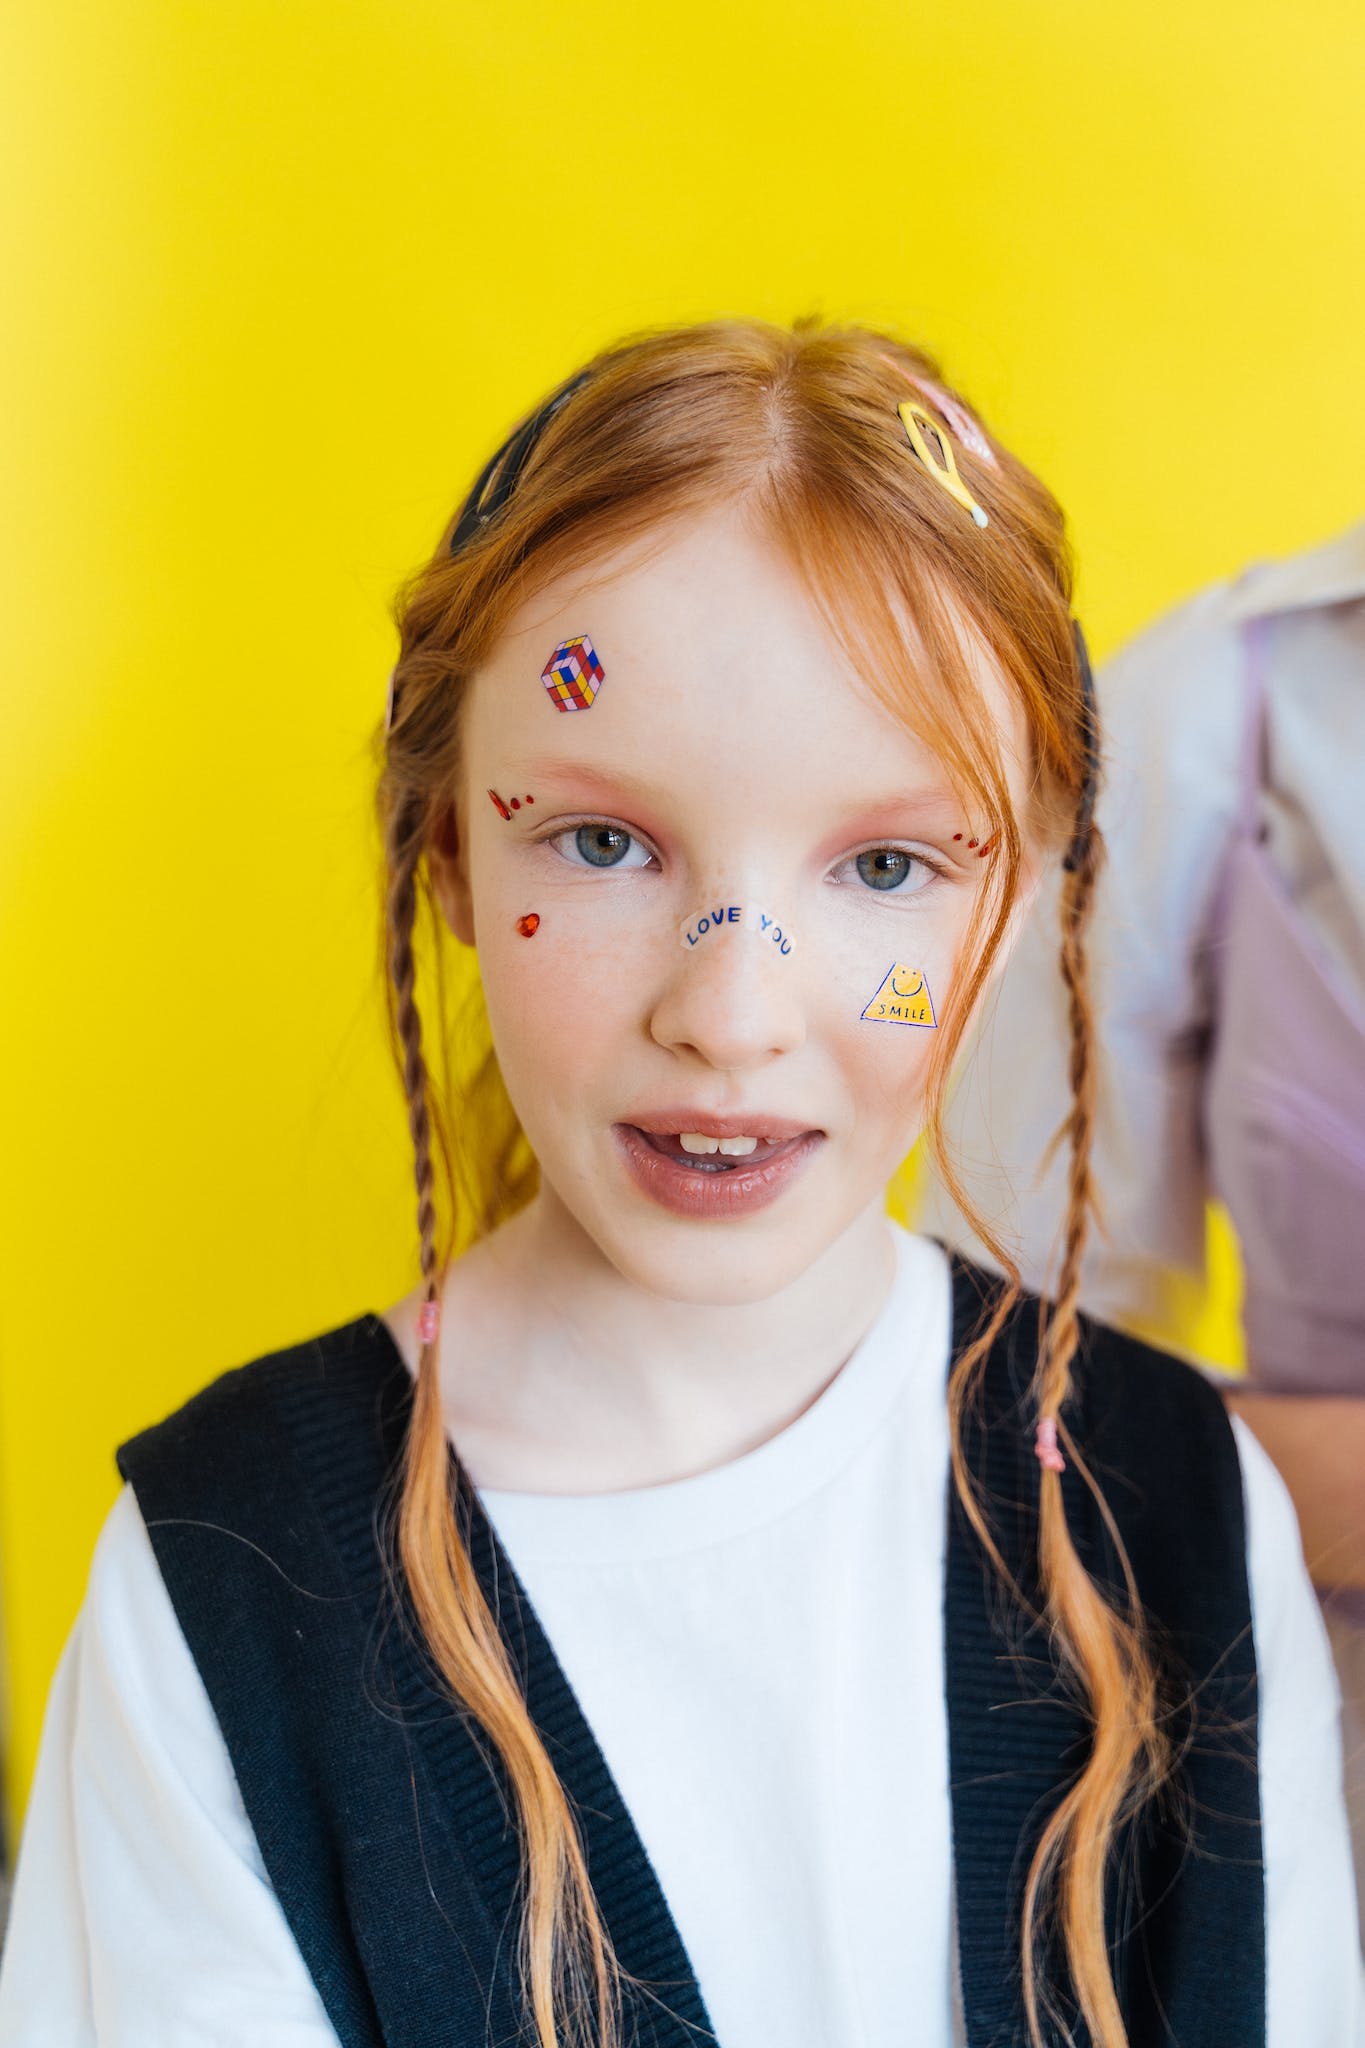 Girl with Cute Stickers on Her Face